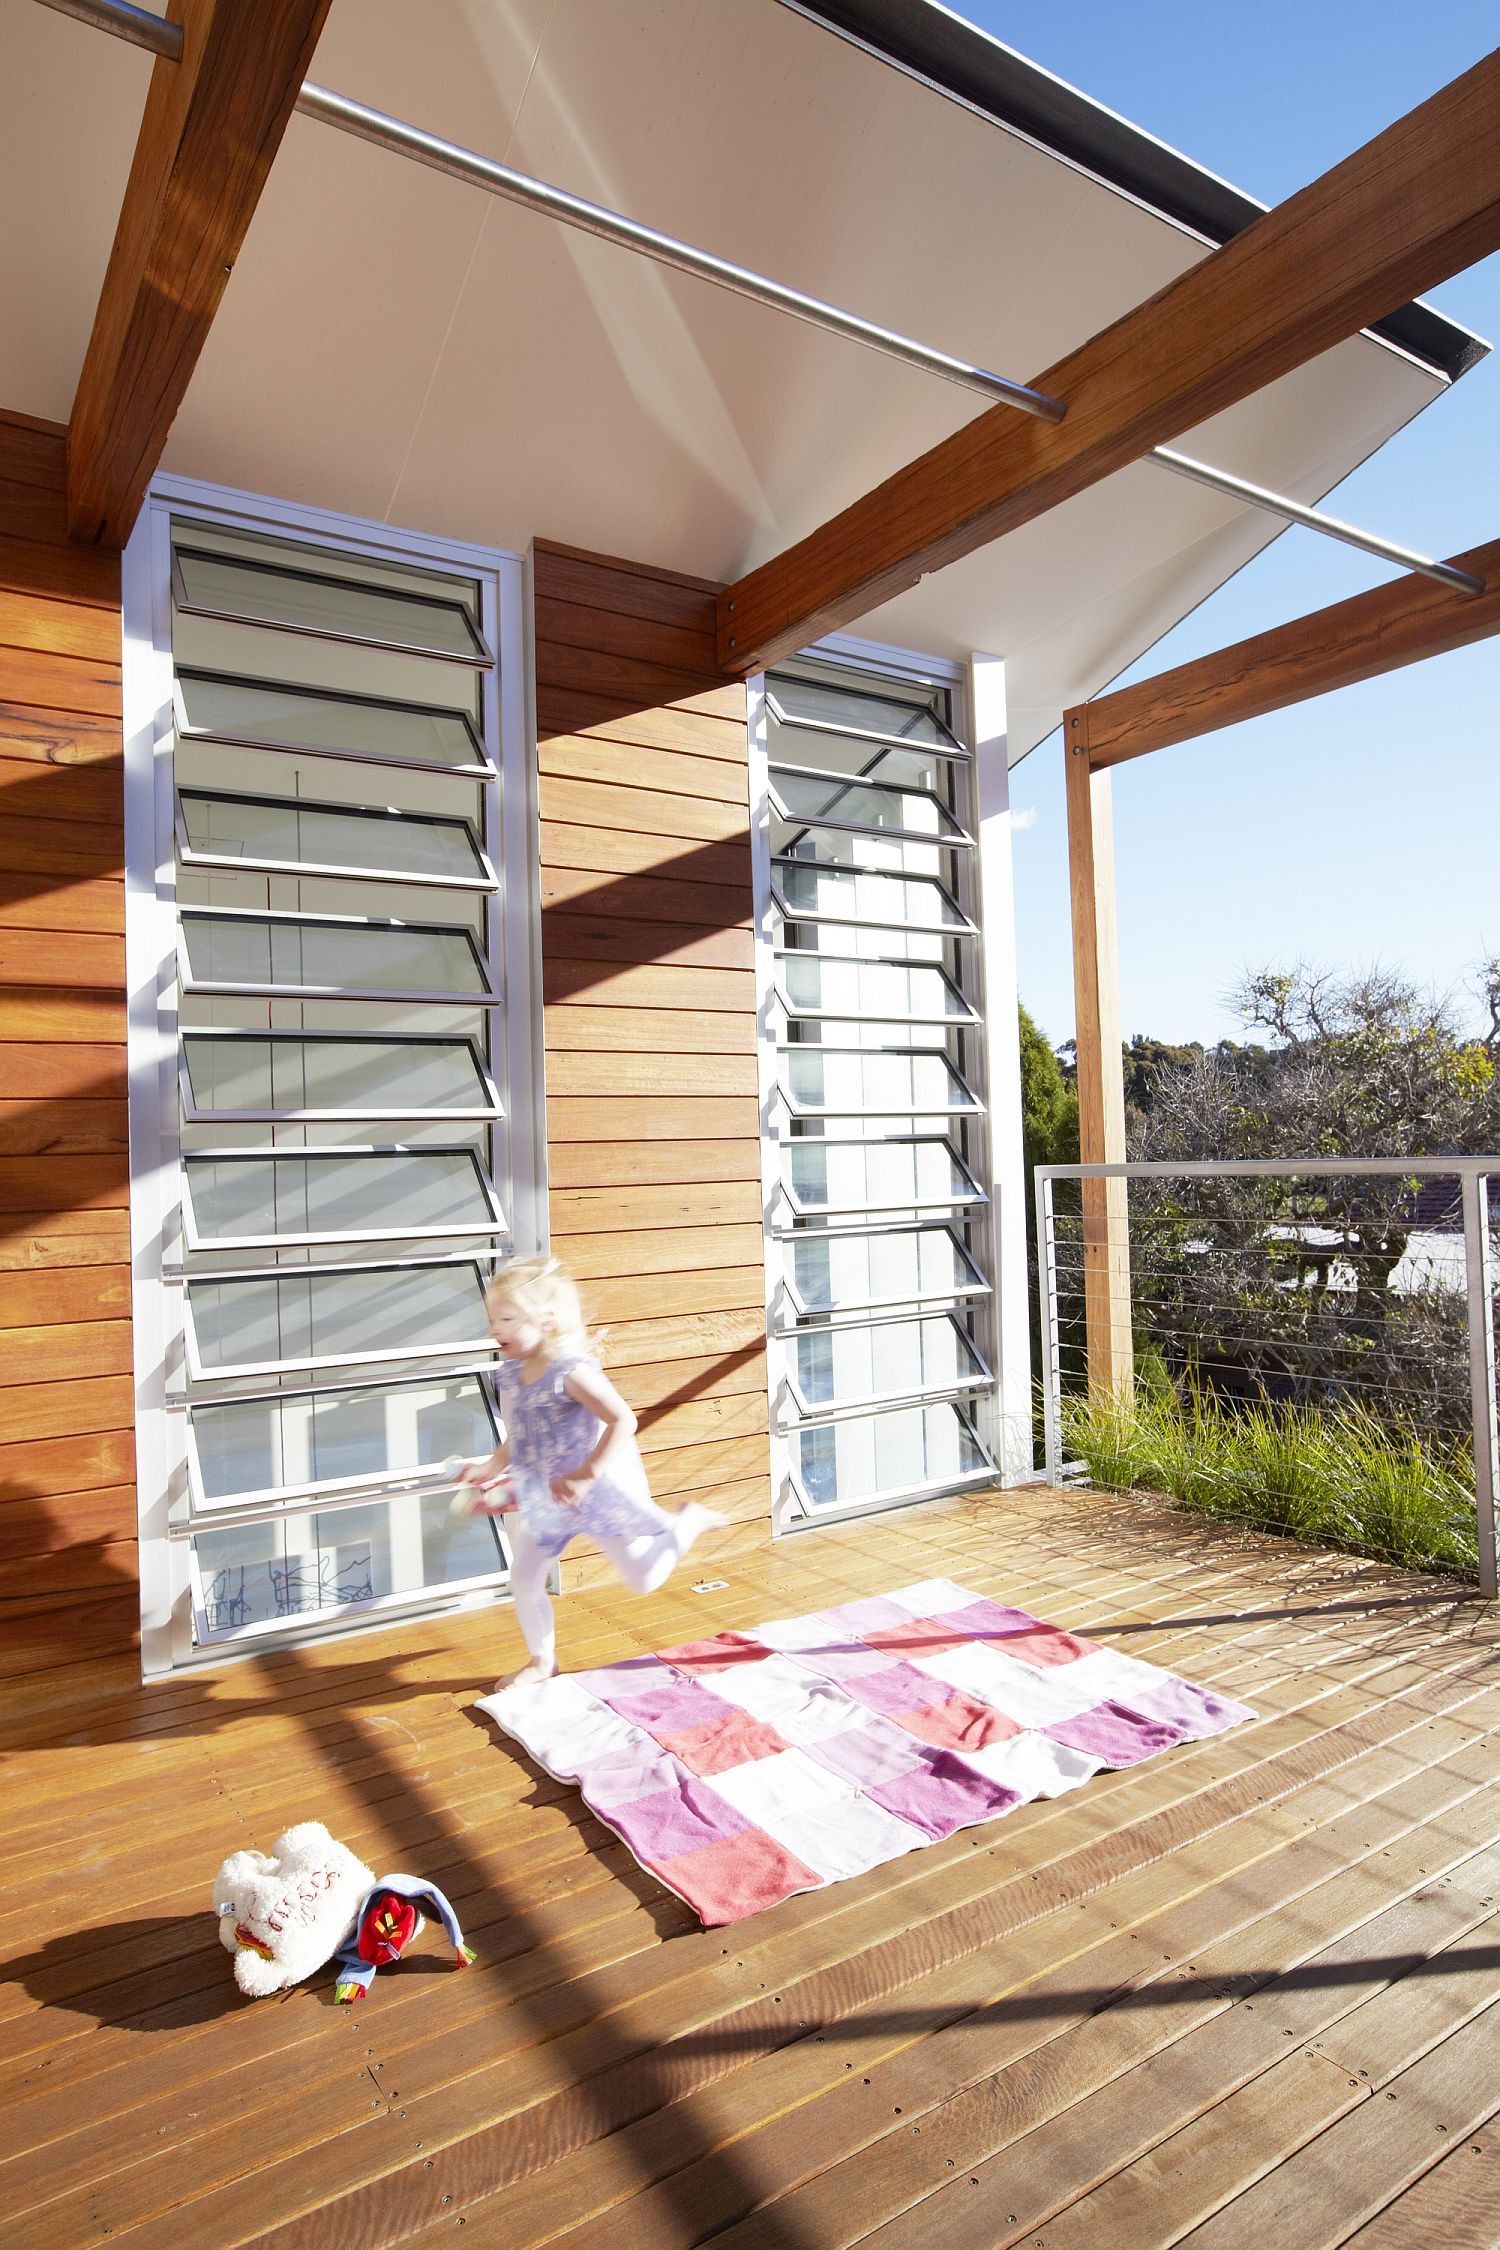 Moving-roof-offers-shade-to-those-on-the-deck-when-needed